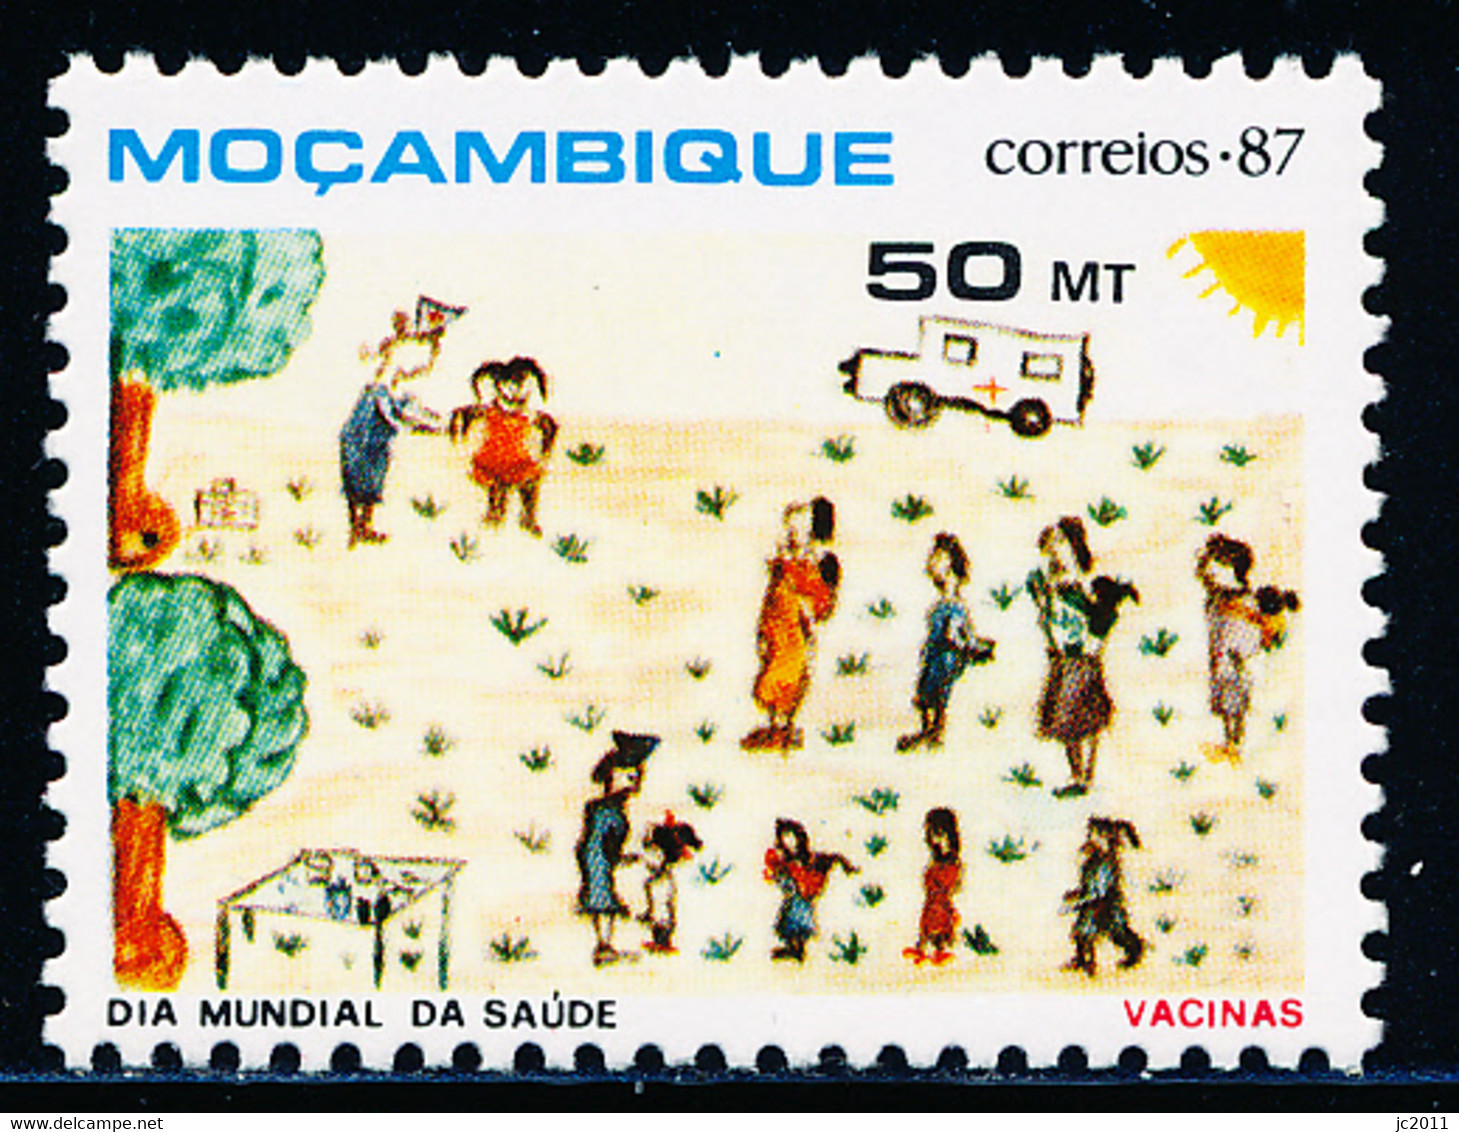 Mozambique - 1987 - World Health Day / Vaccines - MNH - Mozambique